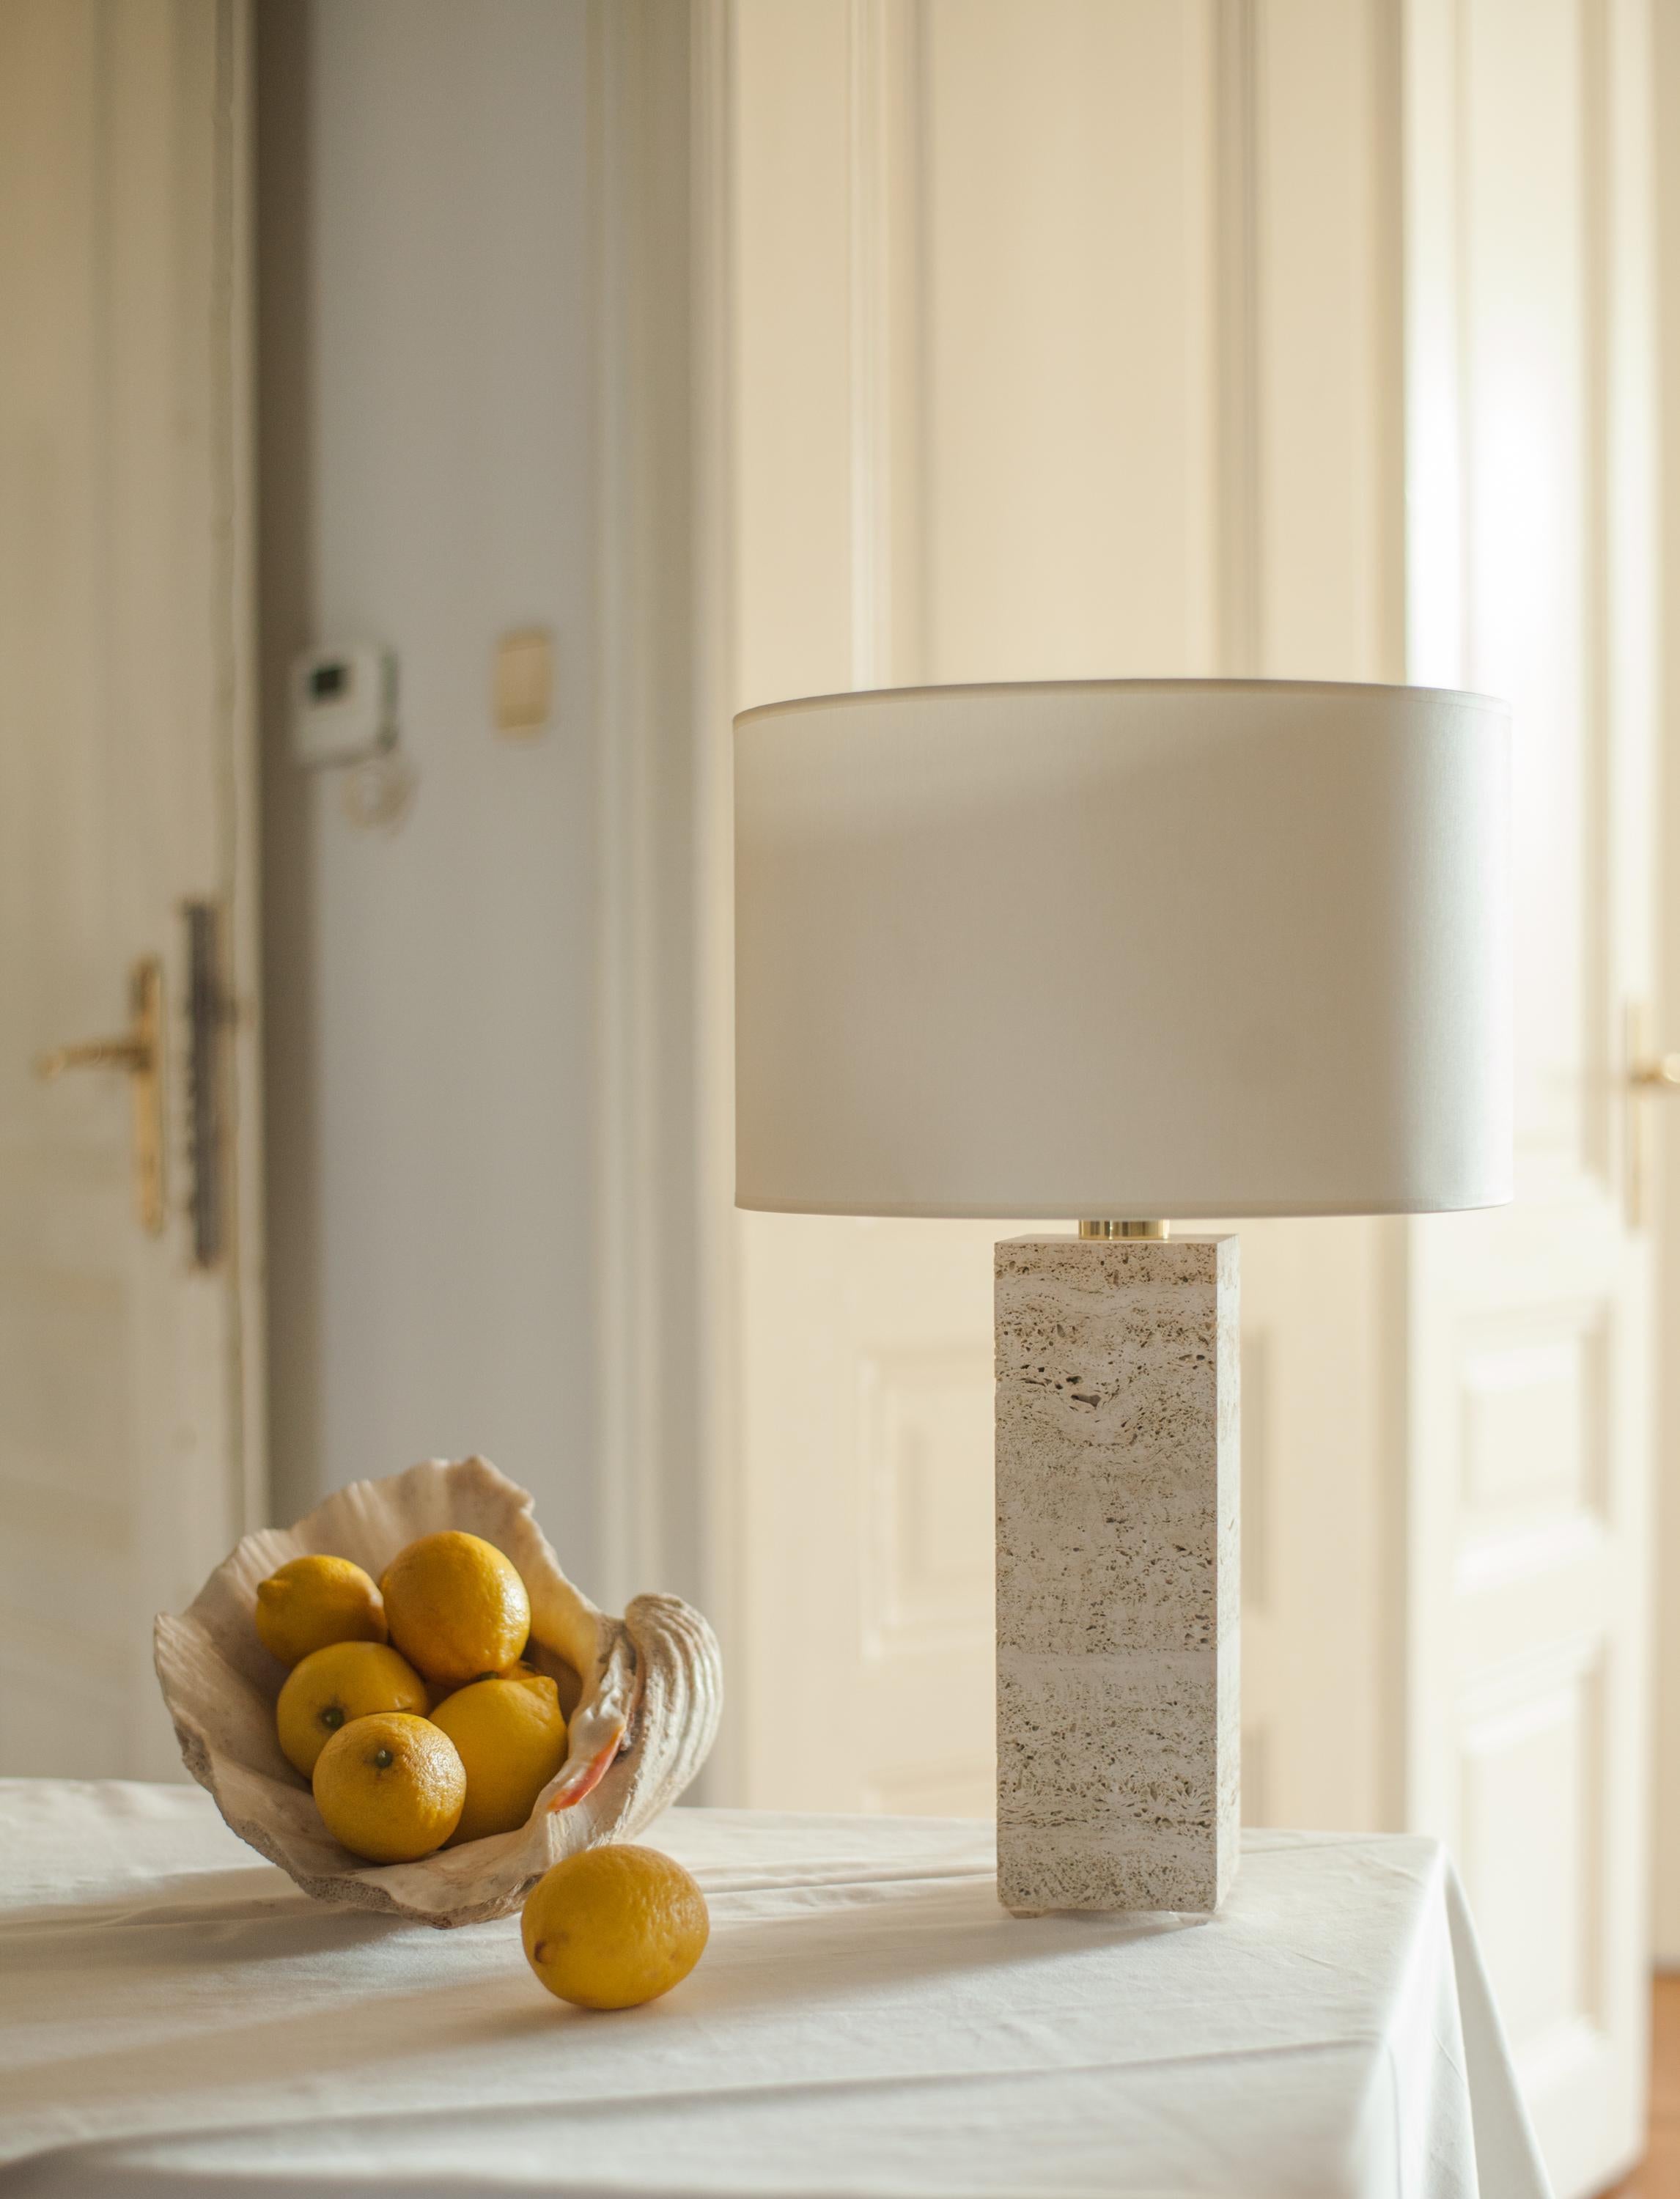 Travertine sculpted table lamp by Brajak Vitberg
CAPRI 1.1.
Materials: Travertine, Polished brass
White or black cotton lampshade, cotton wiring
Dimensions: 52 x 35 x 35 cm

Bijelic and Brajak are two architects from Ljubljana, Slovenia.
They